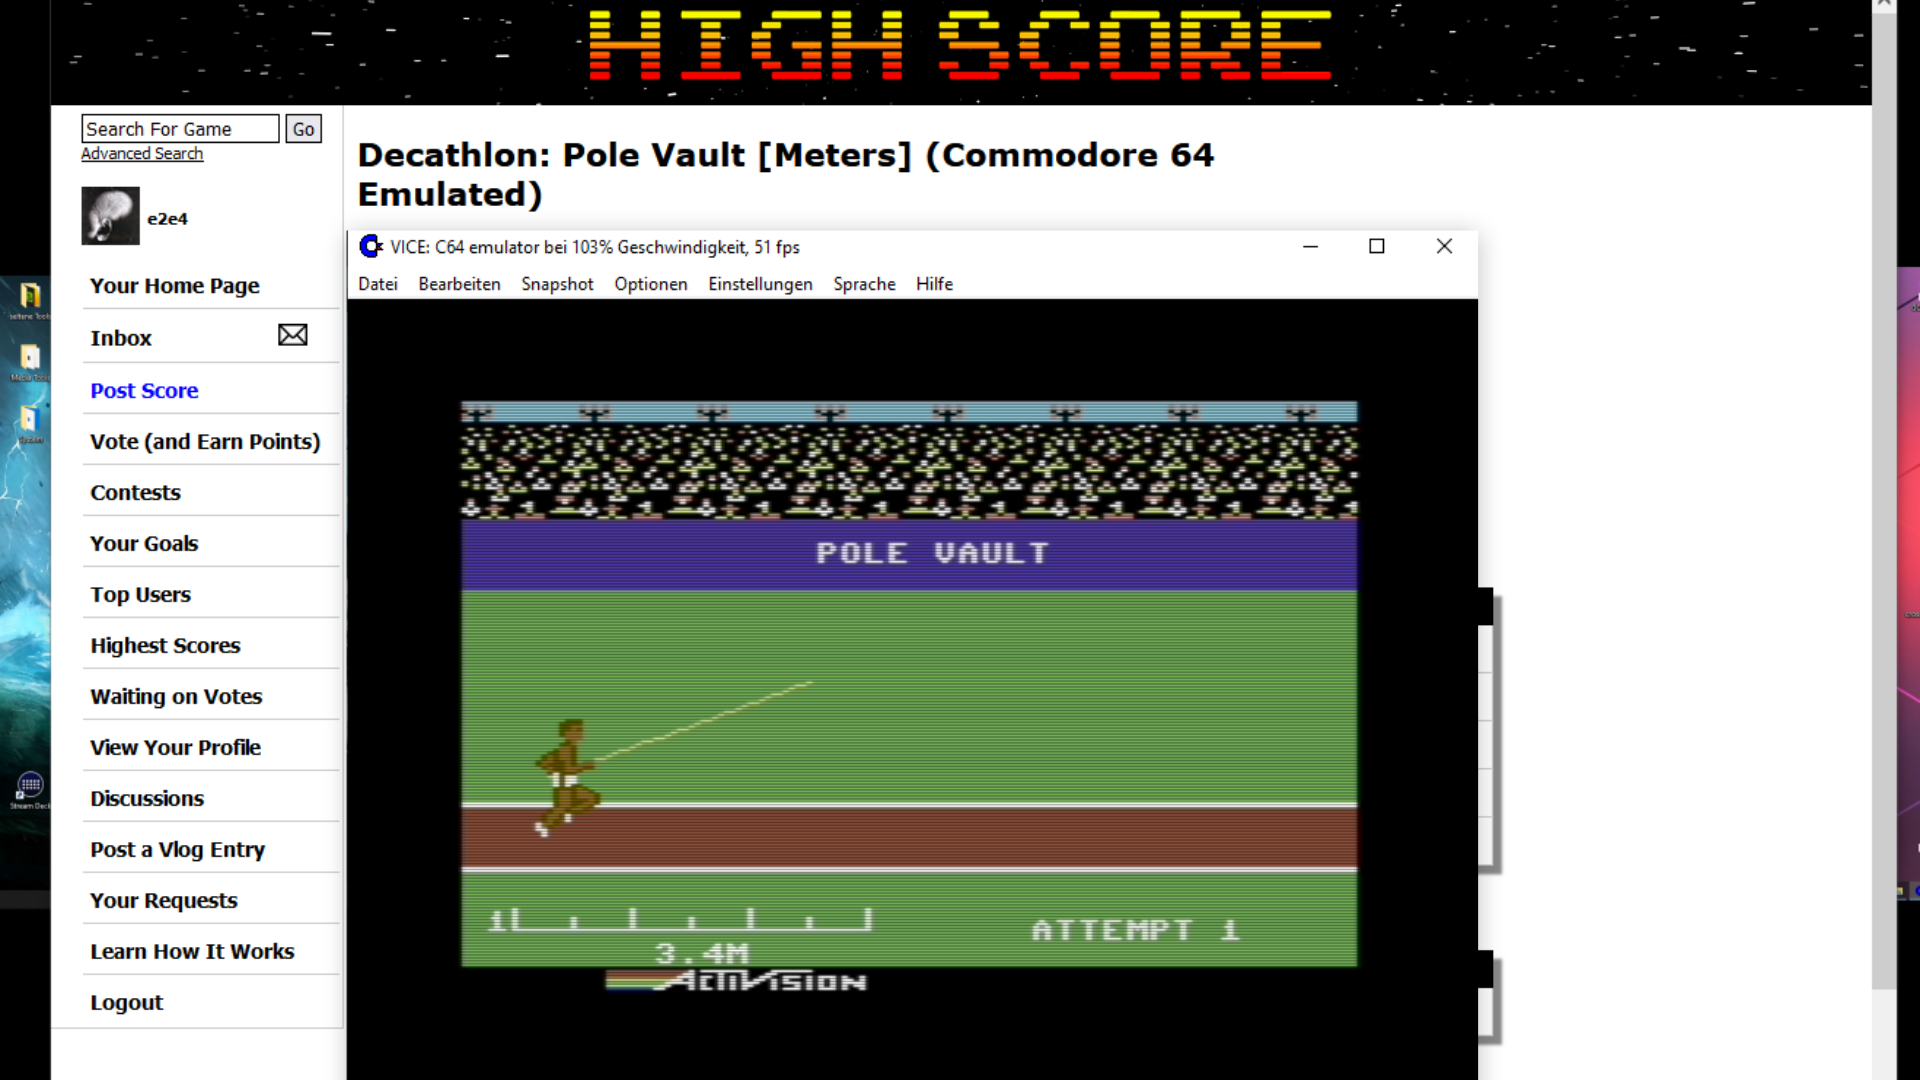 e2e4: Decathlon: Pole Vault [Meters] (Commodore 64 Emulated) 34 points on 2022-05-28 15:13:50